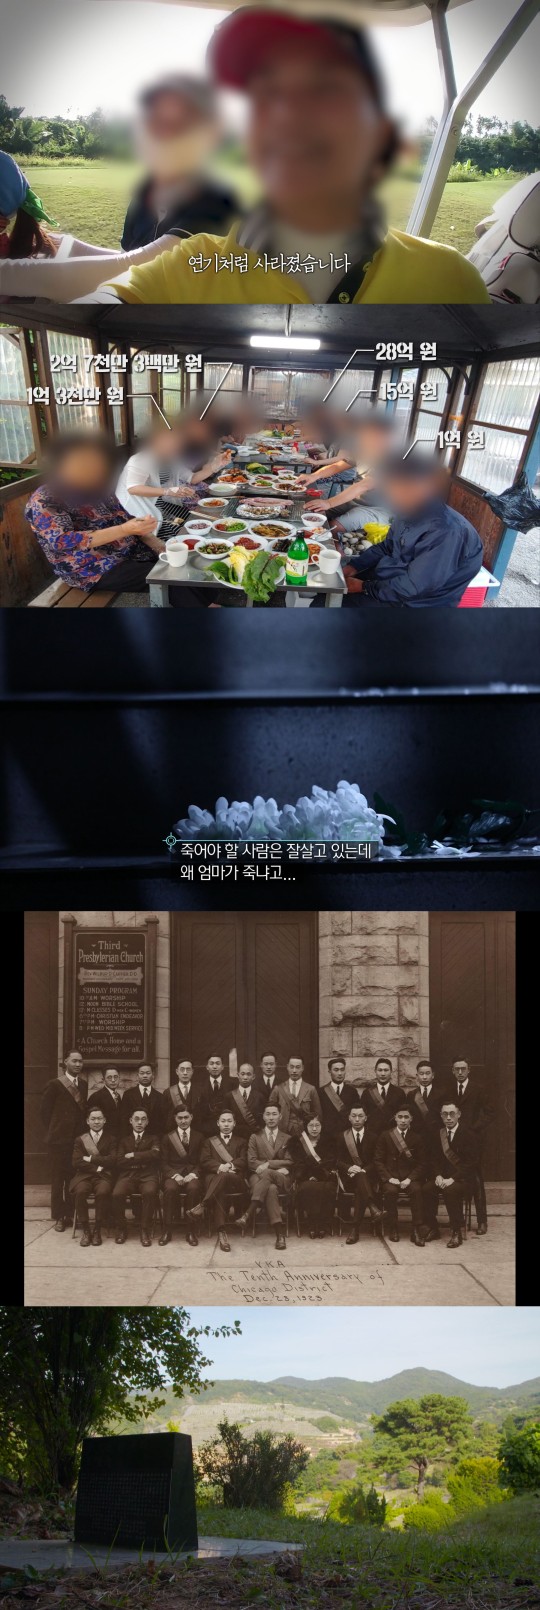 The lost tomb of Governor Ha Hee-ok of the true story exploration team & the identity of the wife who fled with 14 billion won?